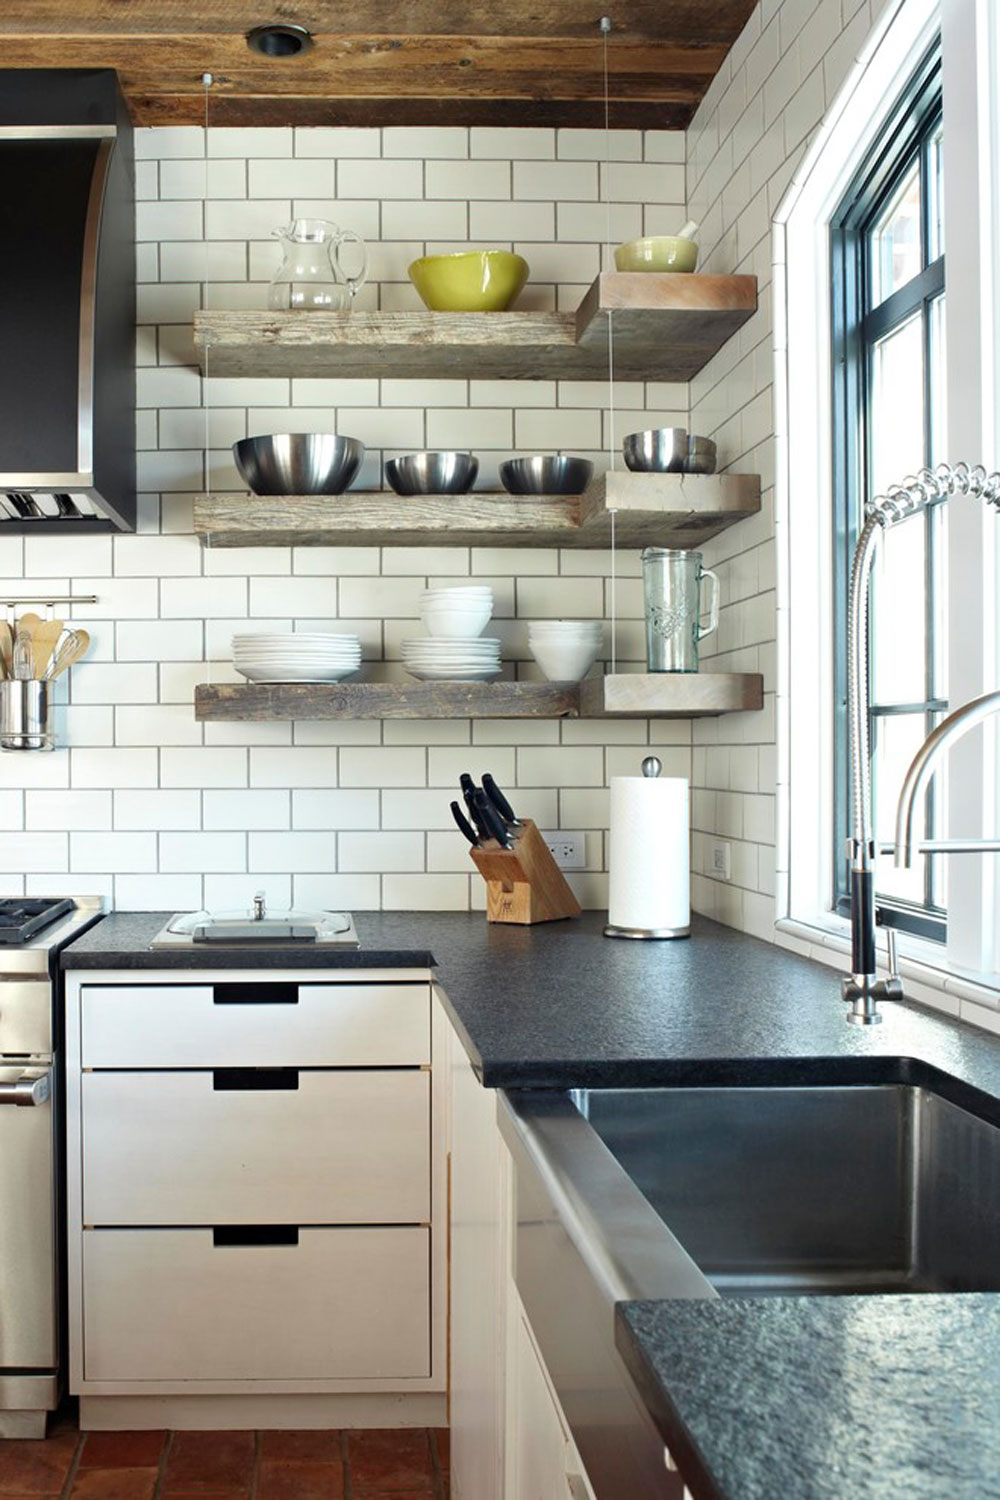 European-Cottage-by-bba-ARCHITEKTEN Use corner shelves to make the most of your kitchen space